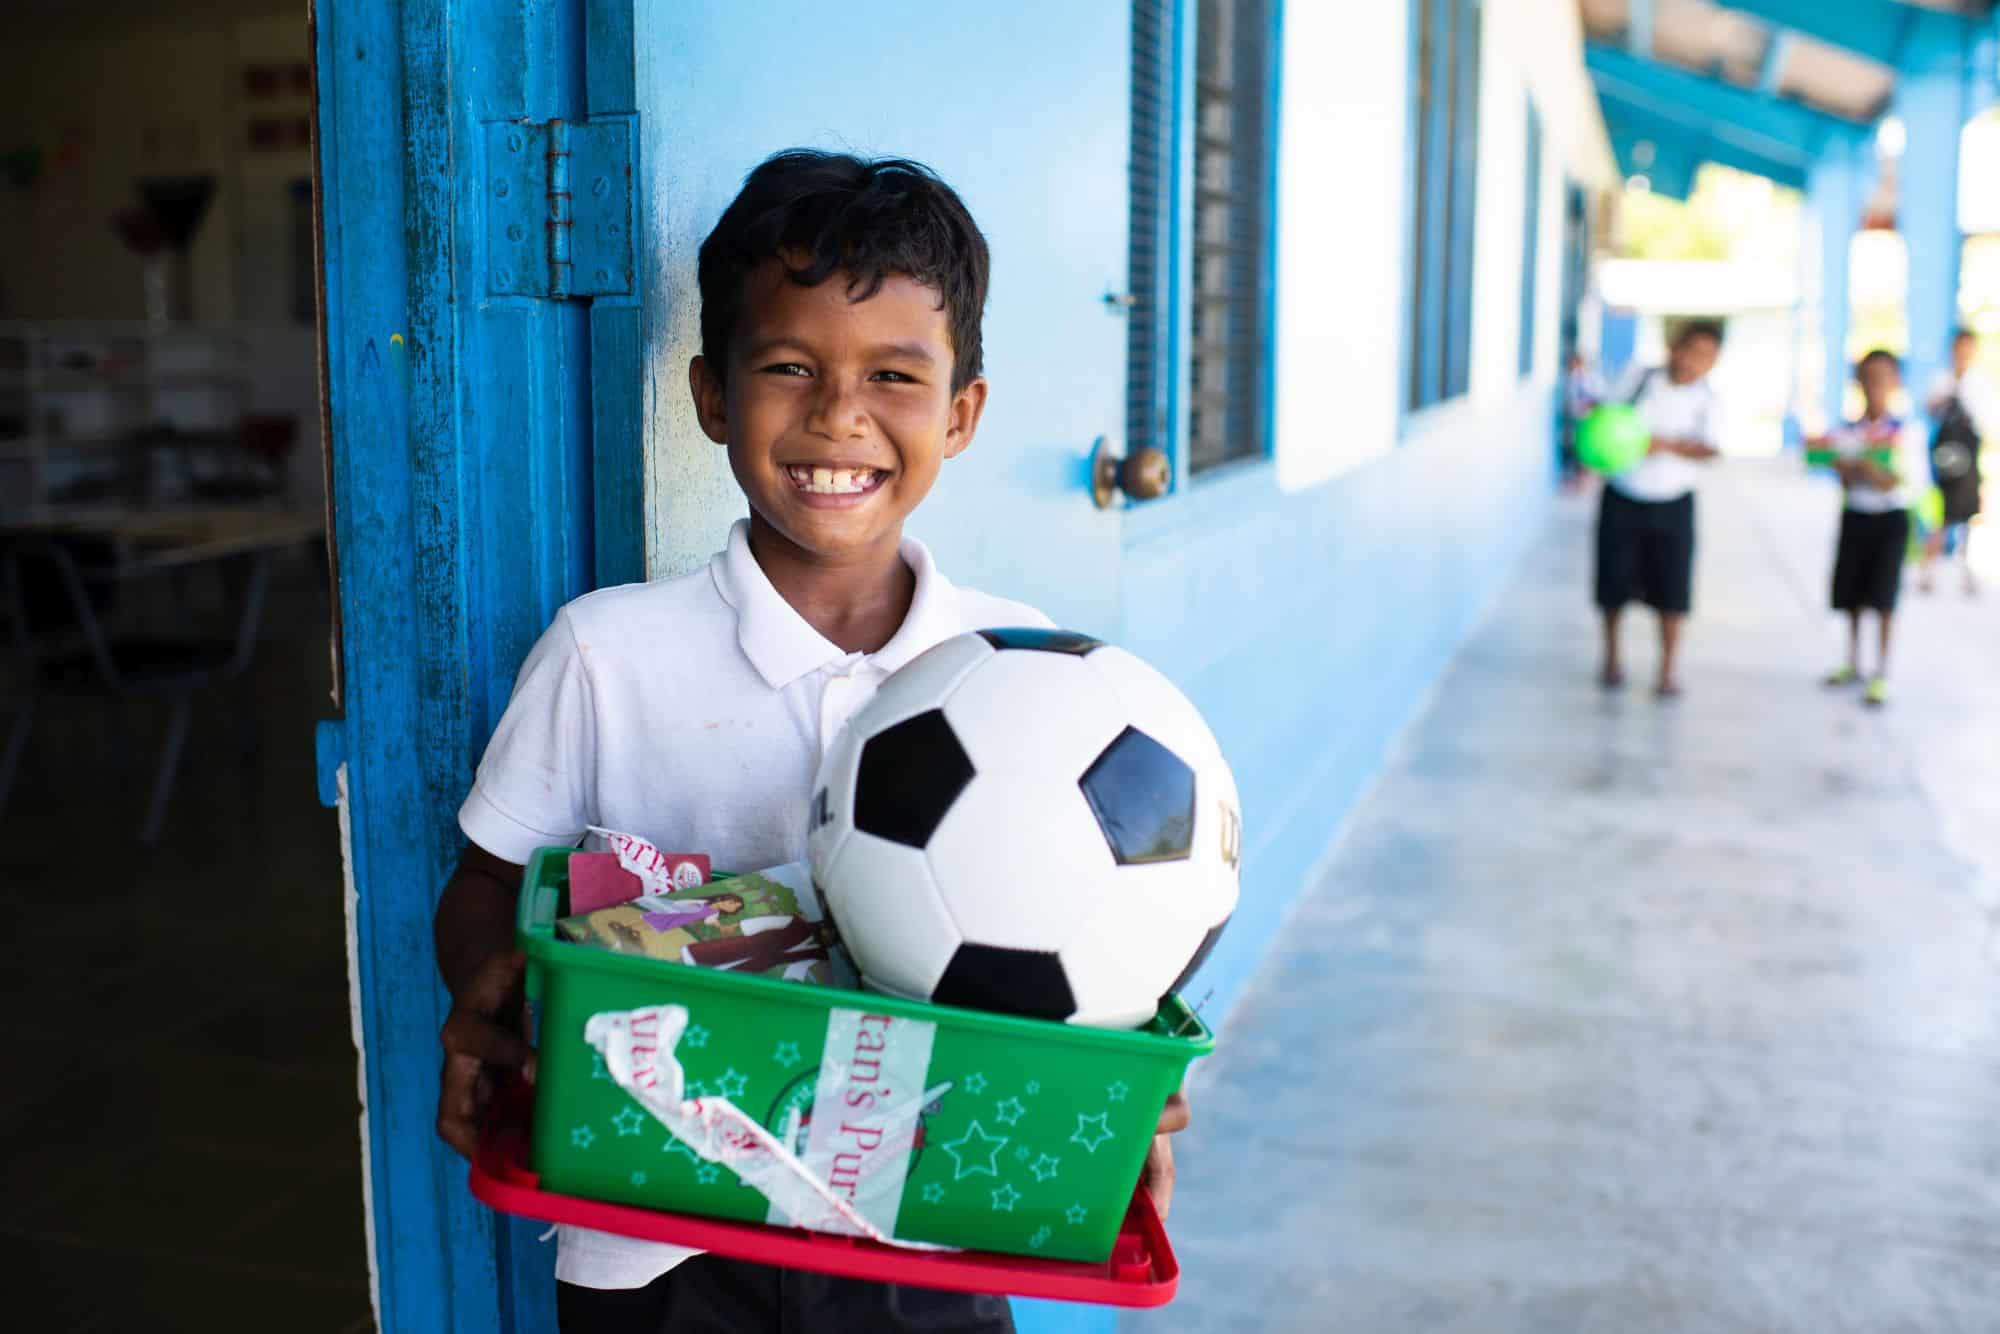 A boy from Peleliu island celebrates the “wow” toy in his gift-filled shoebox.